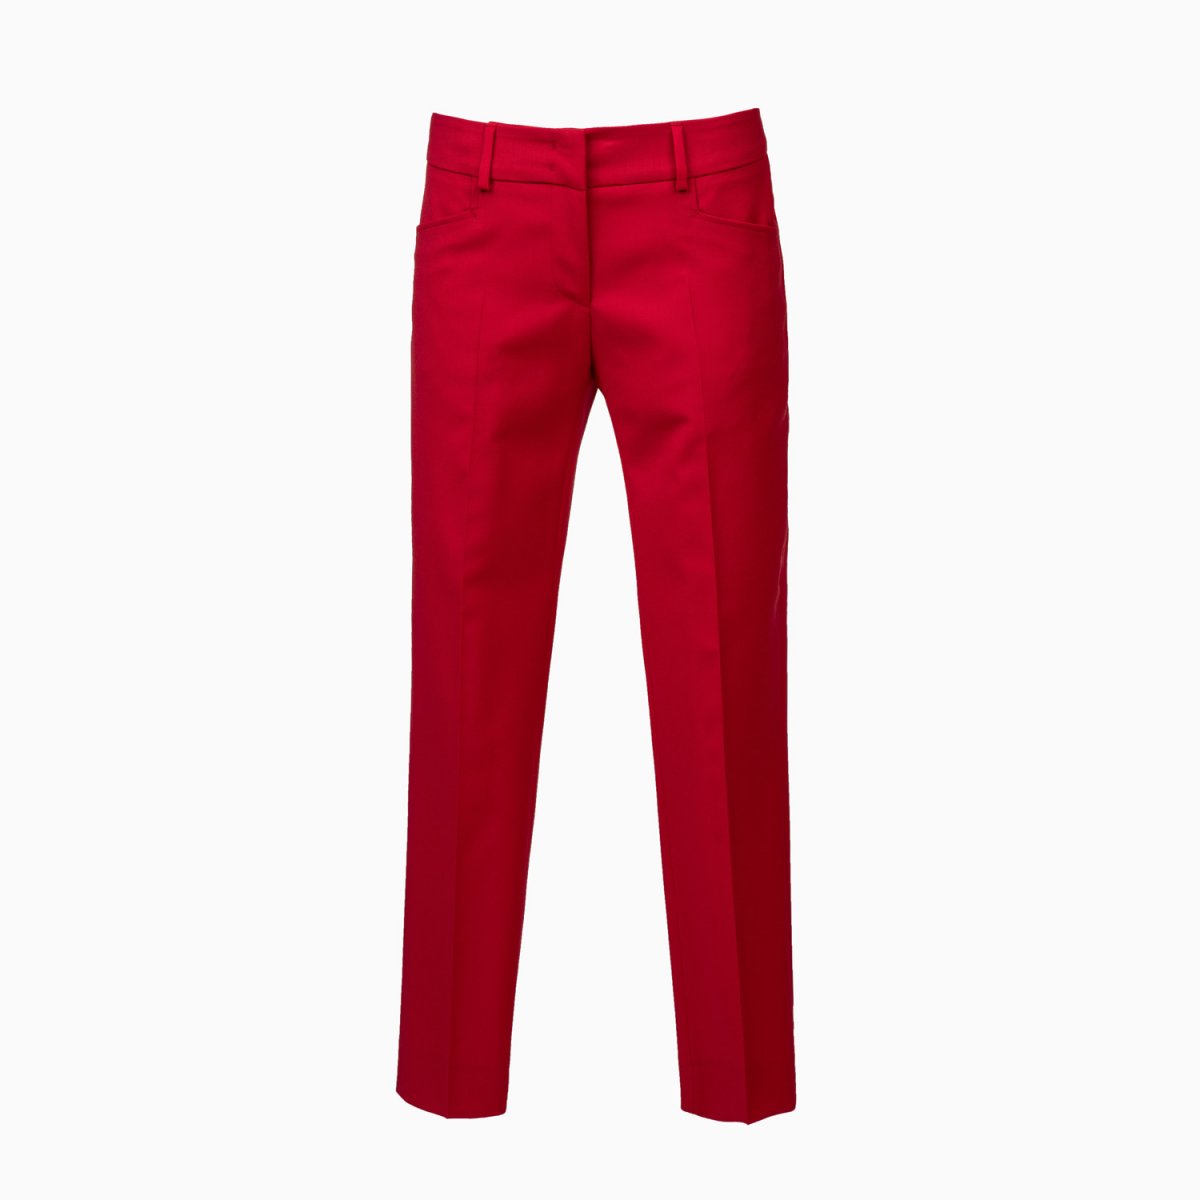 Business-Hose in rot - Mix & Match - Slim Fit